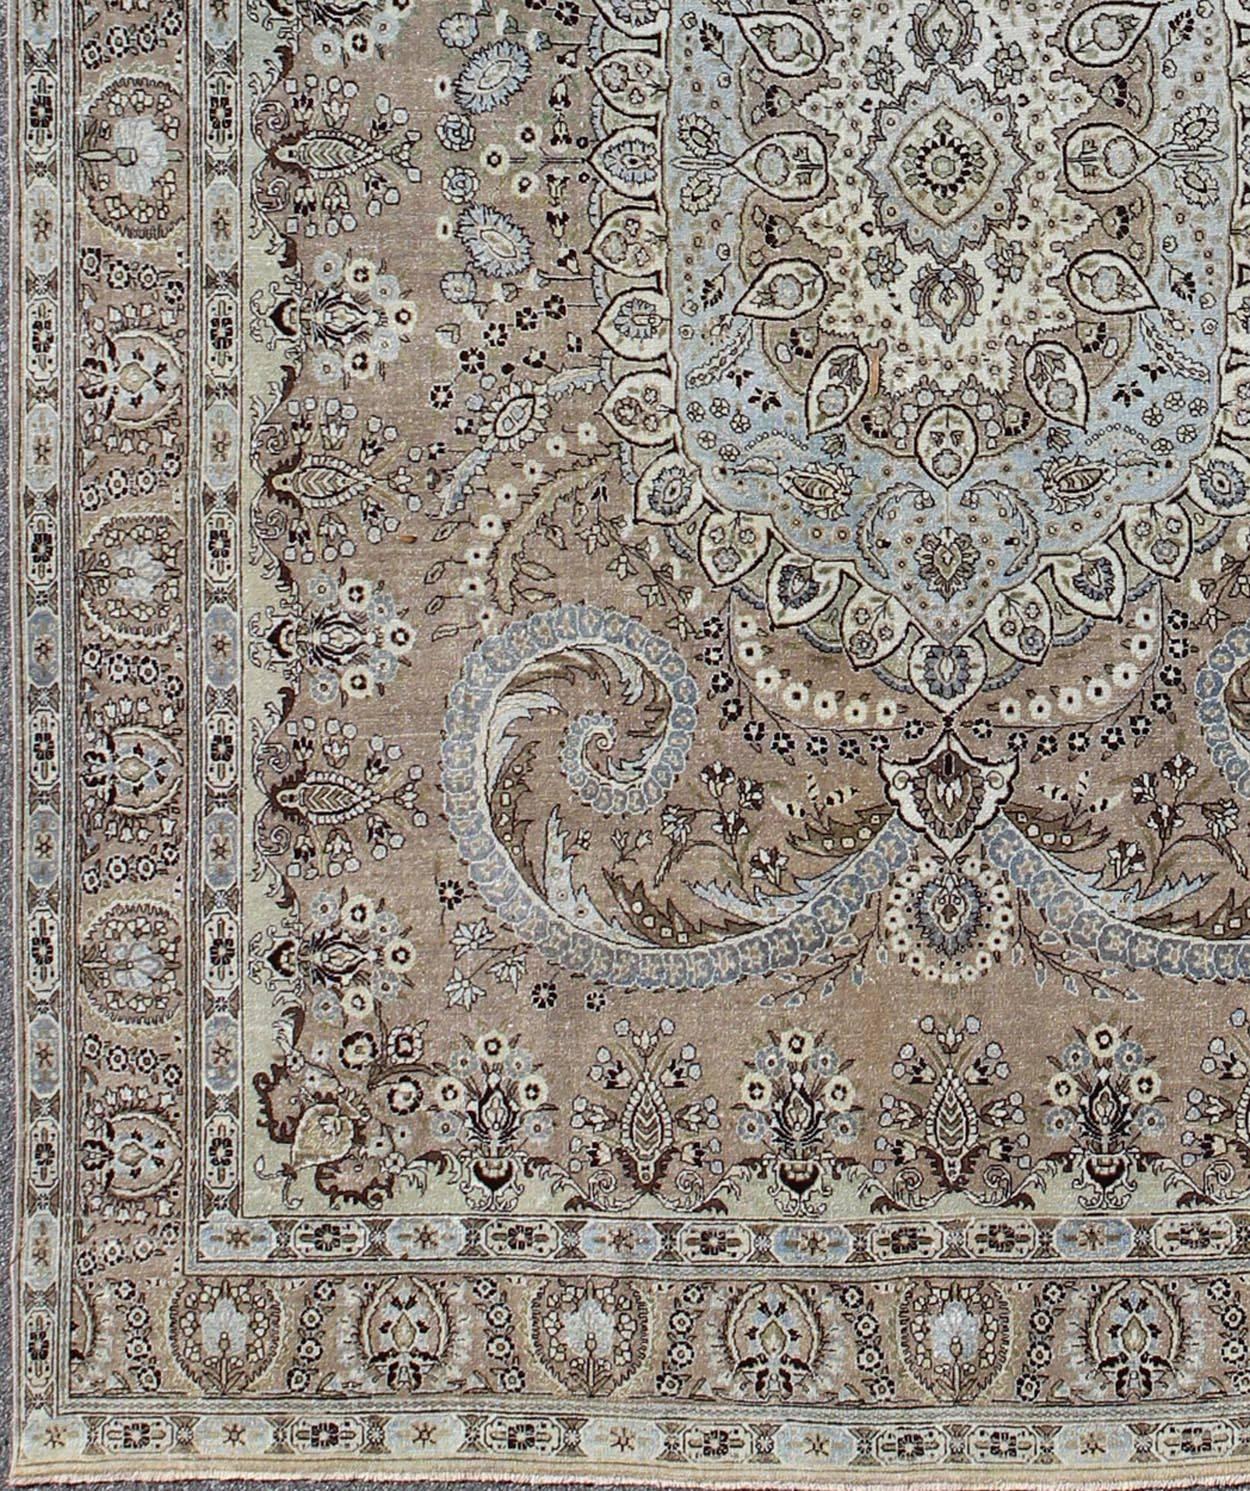 Vintage Persian Bakhtiari rug with stretched medallion in taupe, gray, brown. Keivan Woven Arts / rug / RM-K4570, country of origin / type: Iran / Bakhtiari, circa 1960
Measures: 11' x 14'6.
This vintage Persian Bakhtiari rug from mid-20th century